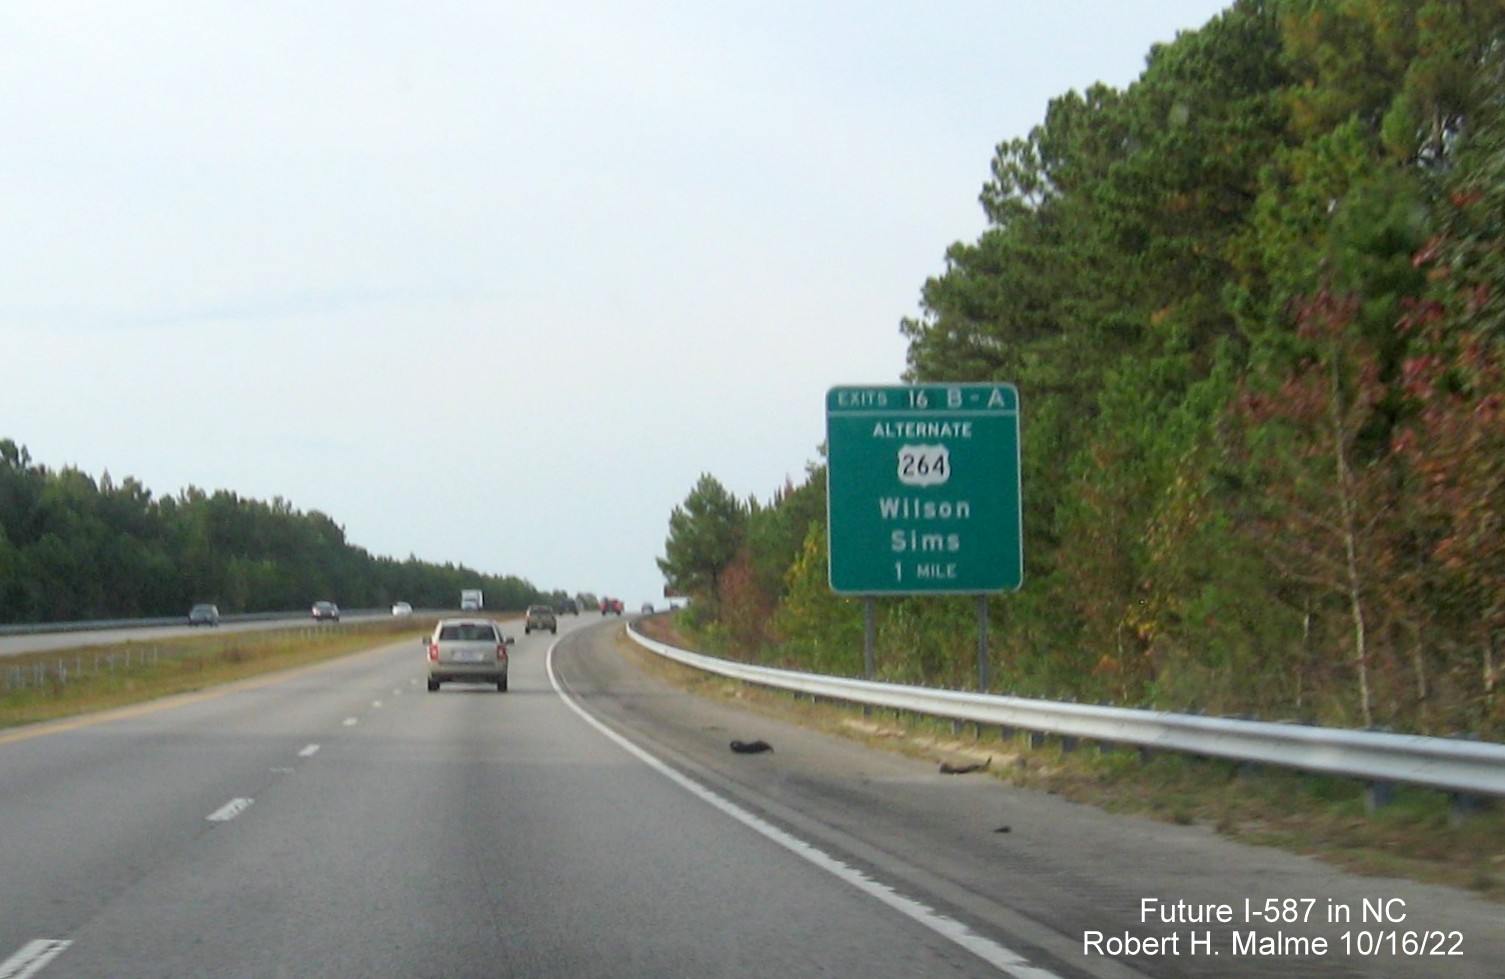 Image of ground mounted 1 mile advance sign for US 264 Alt. exits with new I-587 mile exit number on US 264 East in Sims, Google Maps Street View image, August 2022